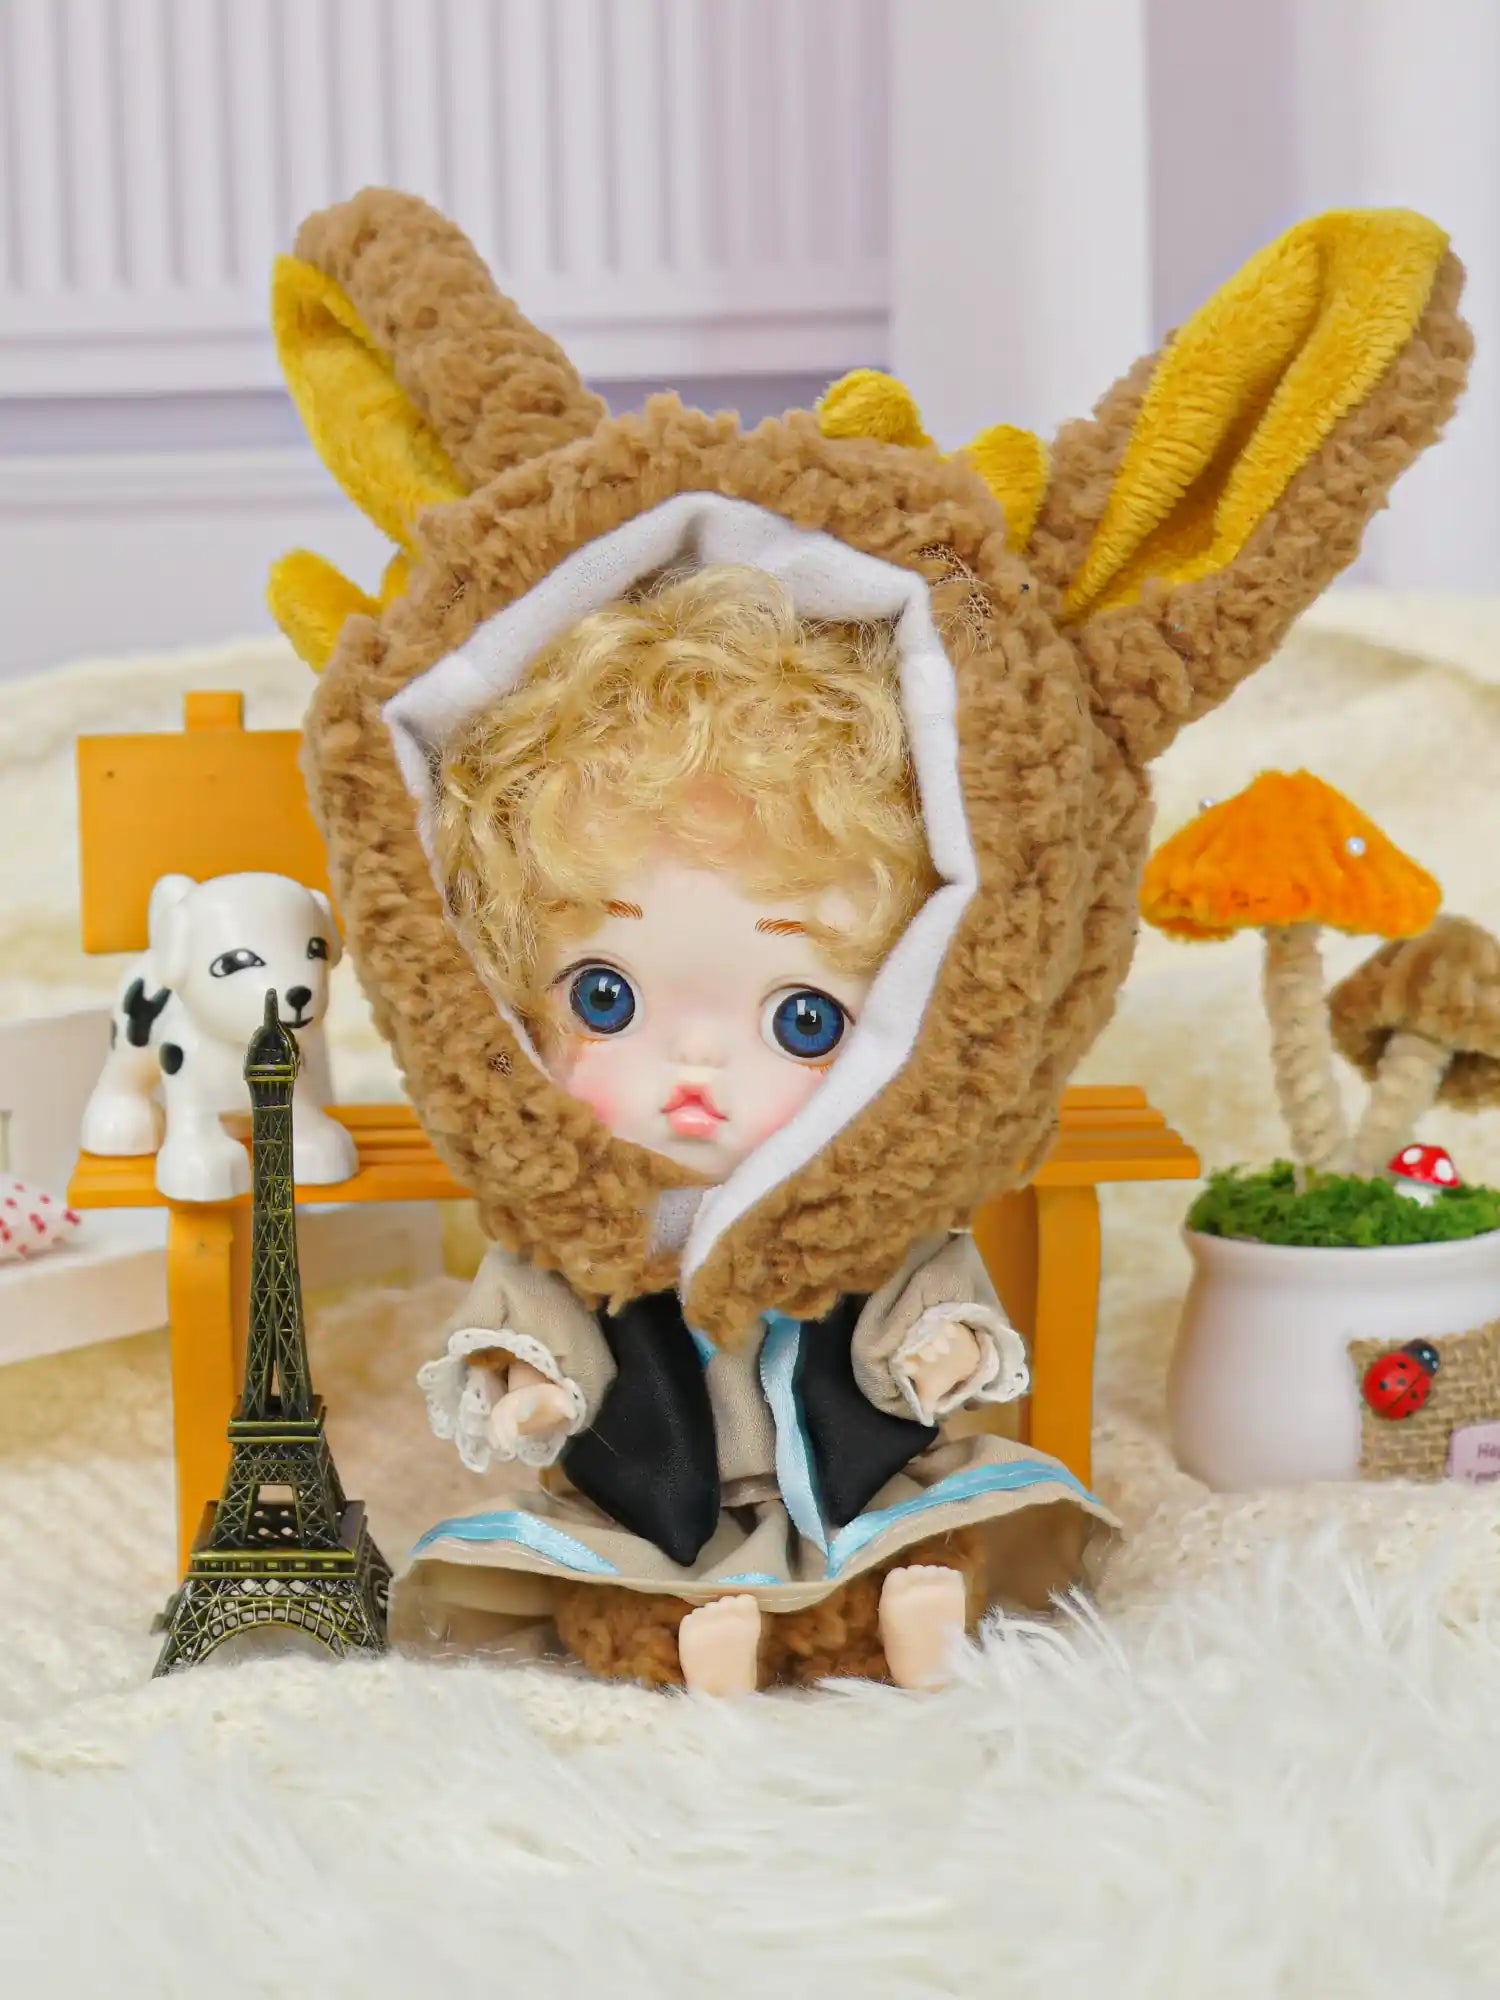 An adorable doll with blue eyes and a cozy bunny hat, situated among playful miniatures including a tiny Eiffel Tower.